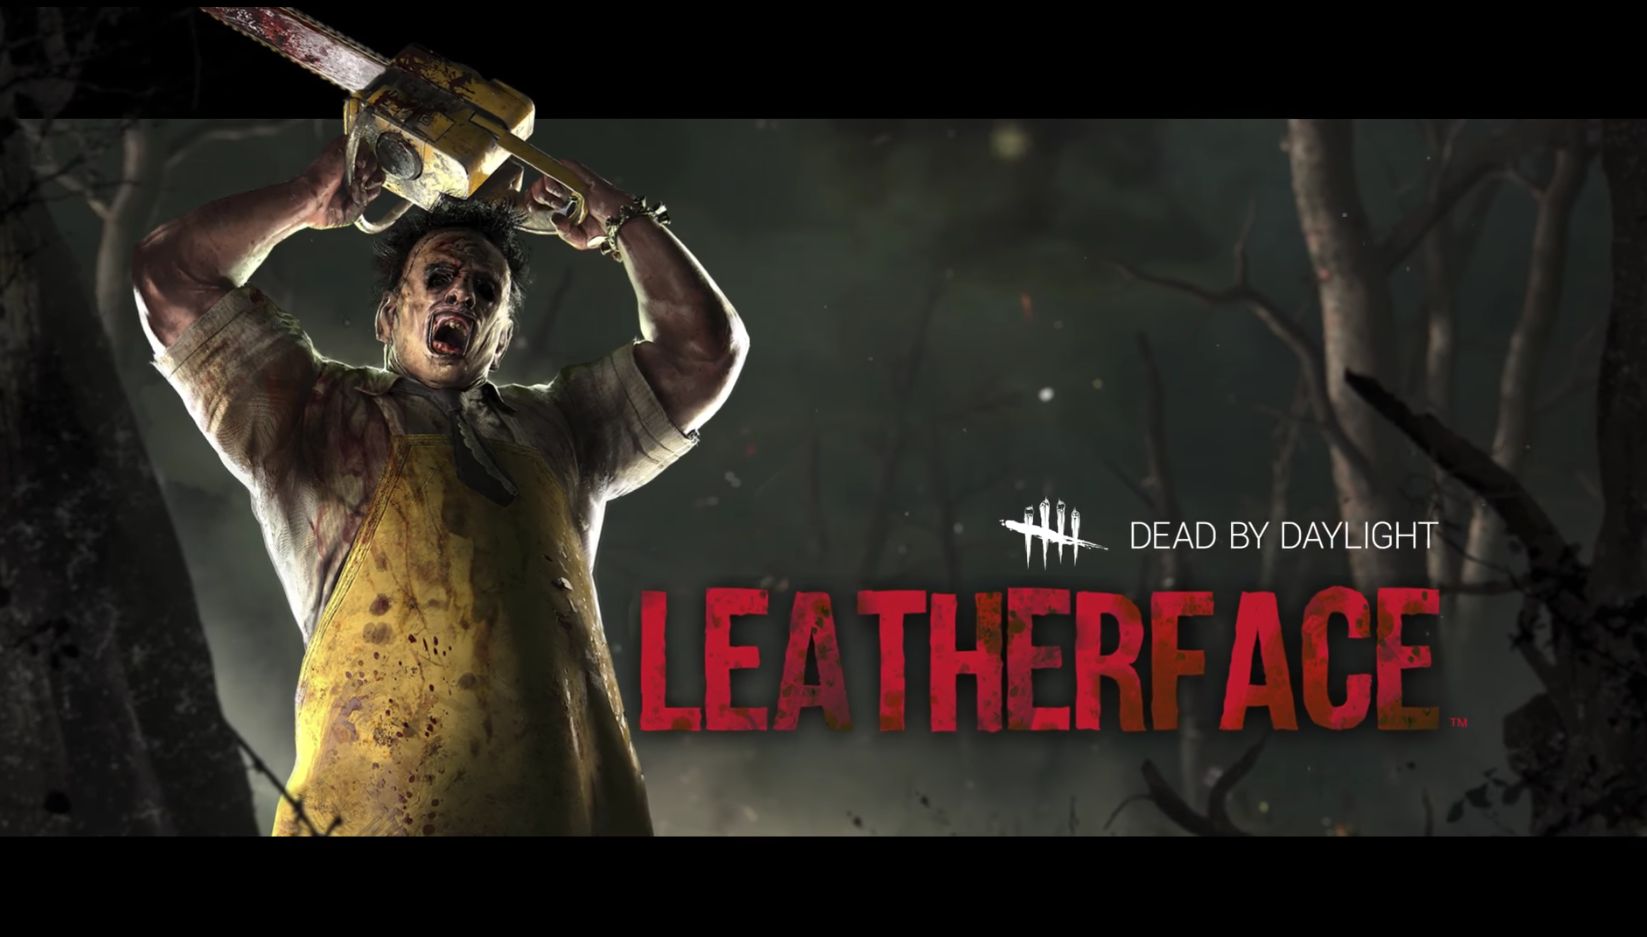 Dead by Daylight trifft Texas Chain Saw Massacre – Neuer Killer „Leatherface“